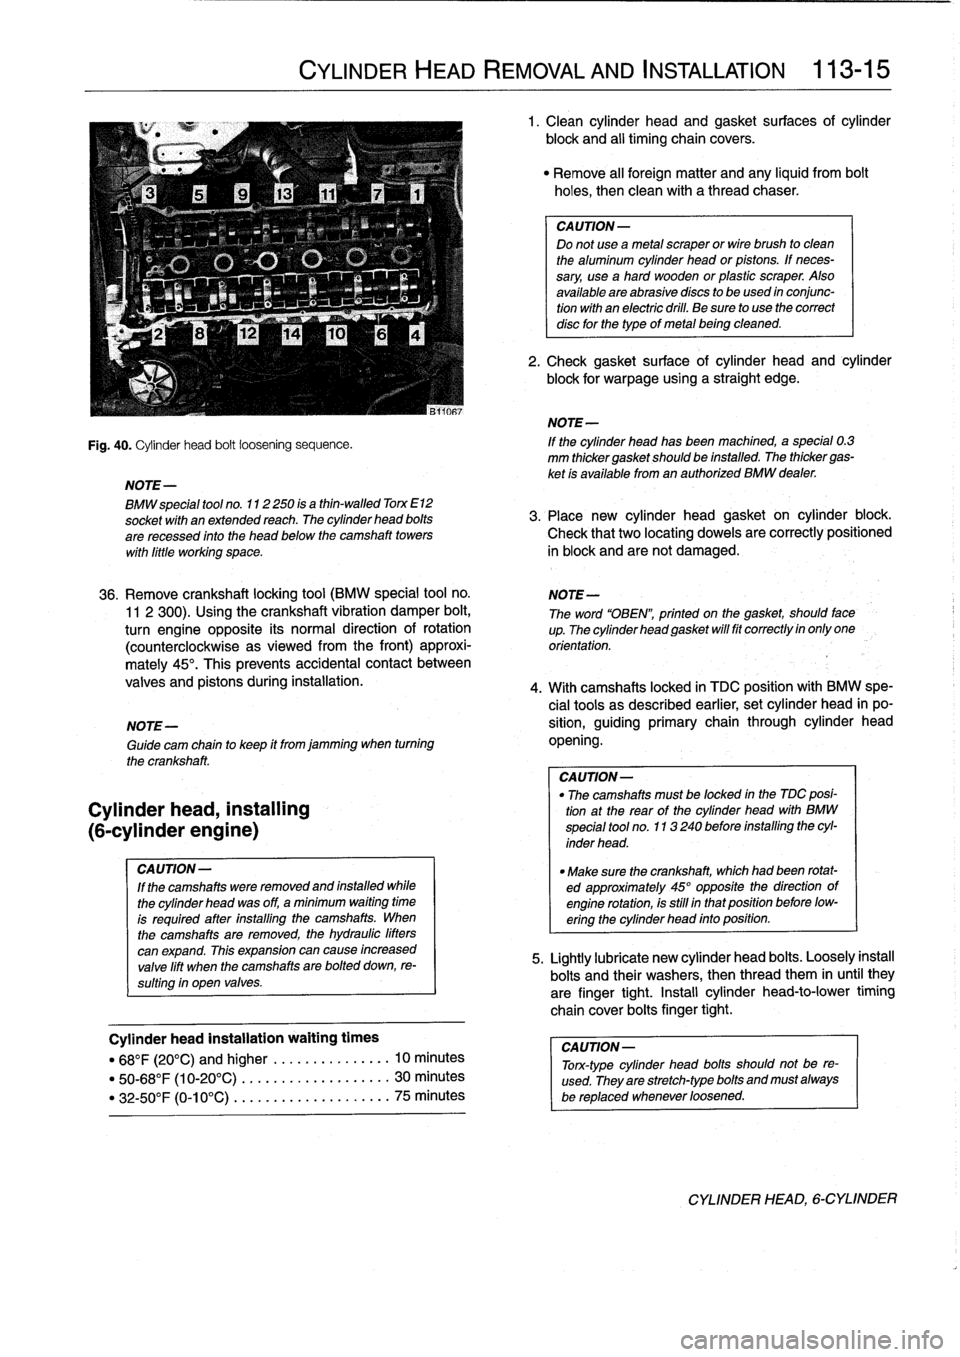 BMW 318i 1996 E36 Workshop Manual 
NOTE-

Cylinder
head,
installing

(6-cylinder
engine)

CAUTION-

If
the
camshafts
were
removed
and
installed
while

the
cylinder
head
was
off,
a
minimum
waiting
time

is
required
after
ínstalling
th